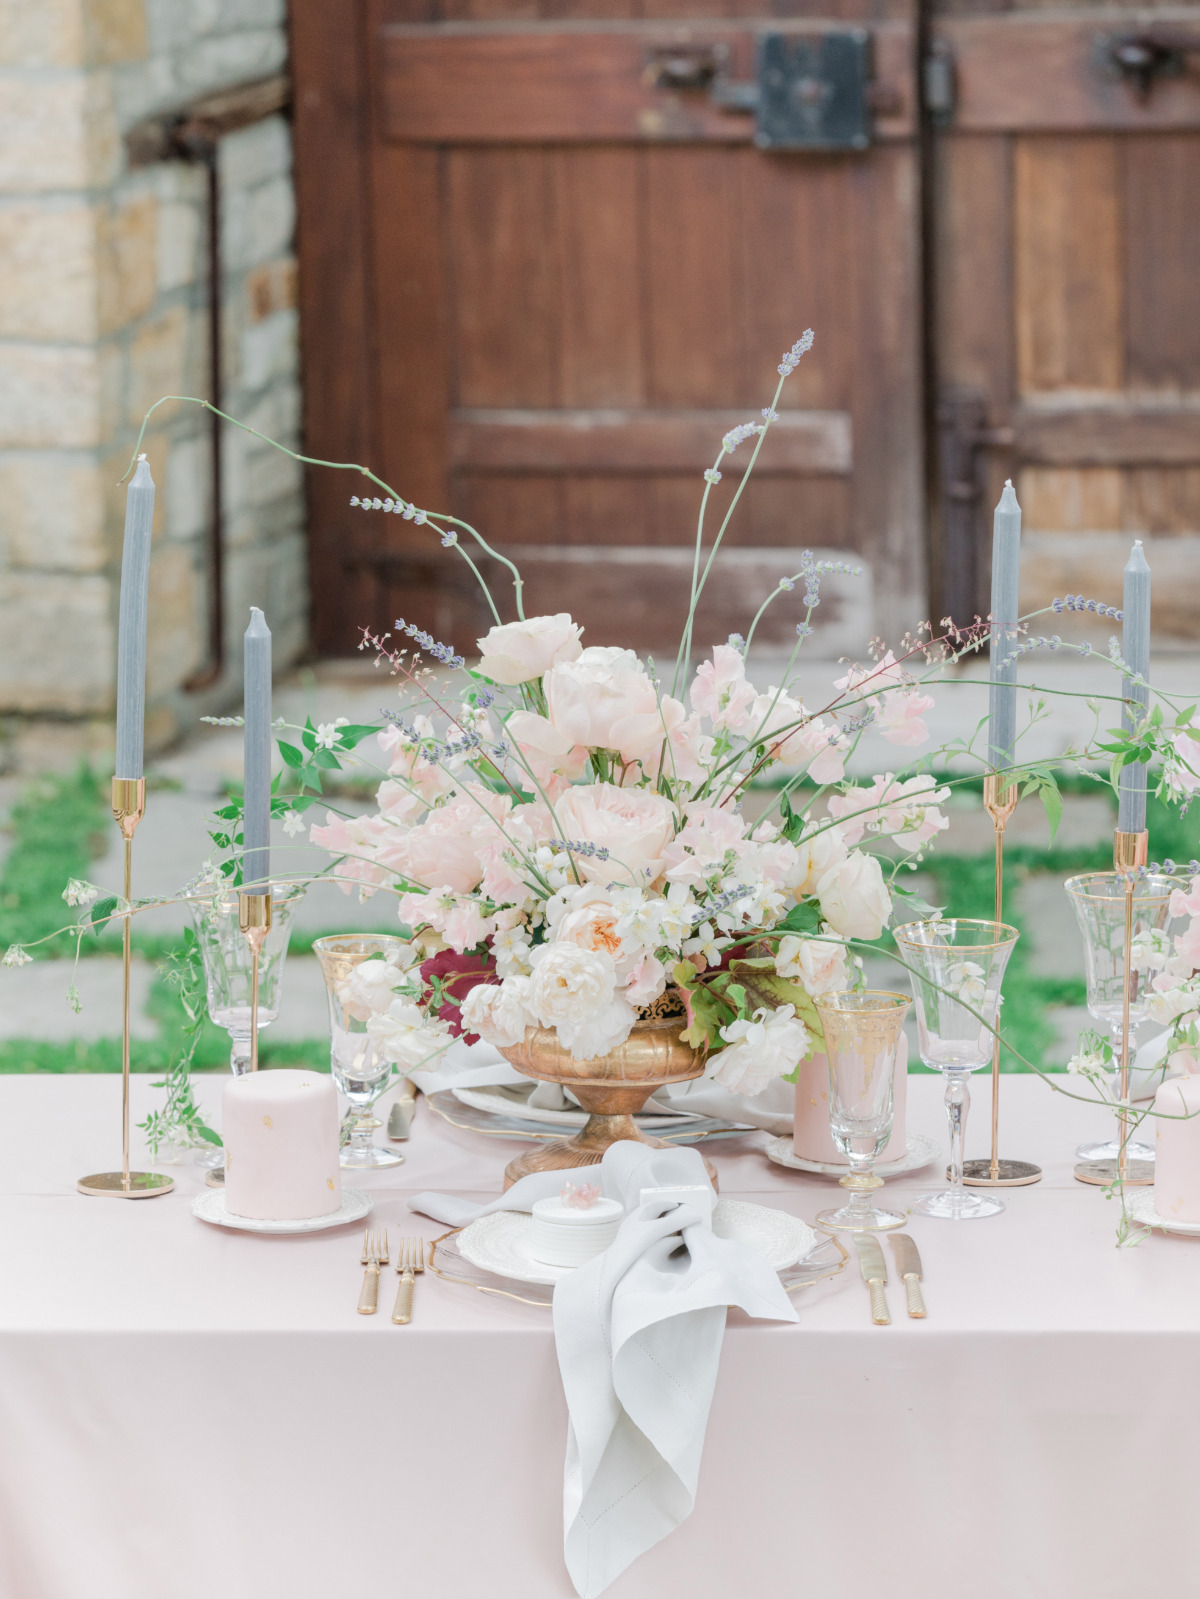 How To Have An Elegant Greek Wedding in Pink and Green